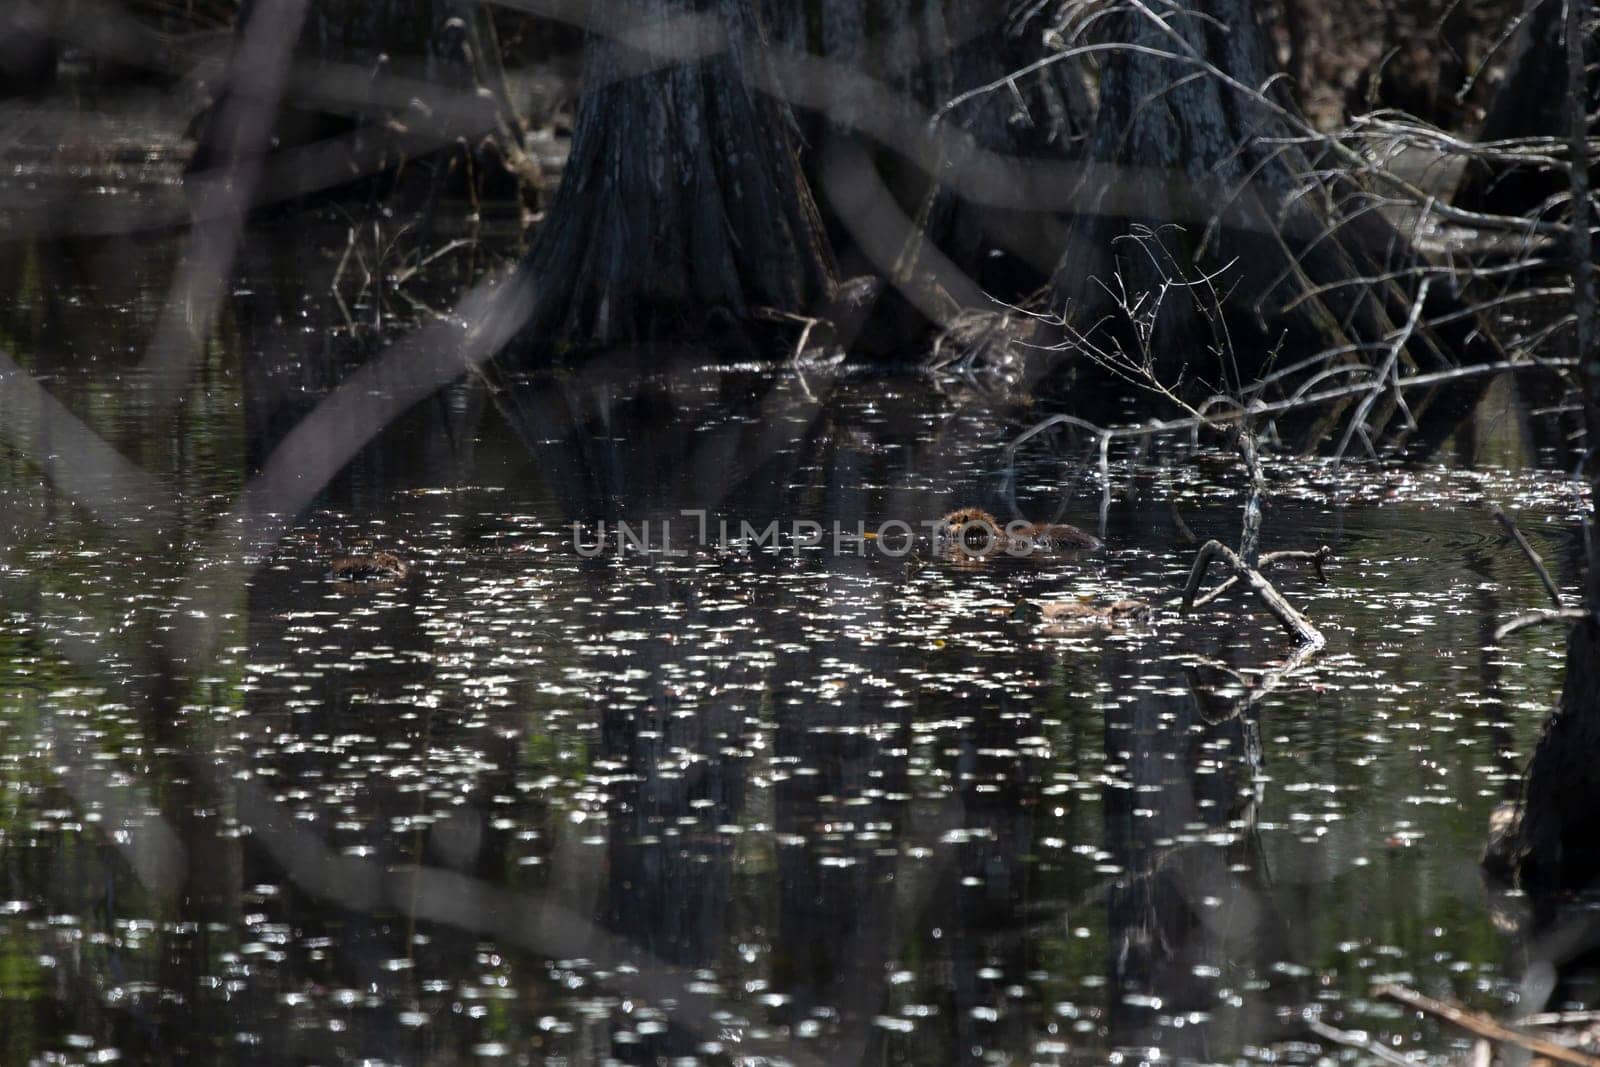 Three young nutria (Myocastor coypus) swimming in a swamp